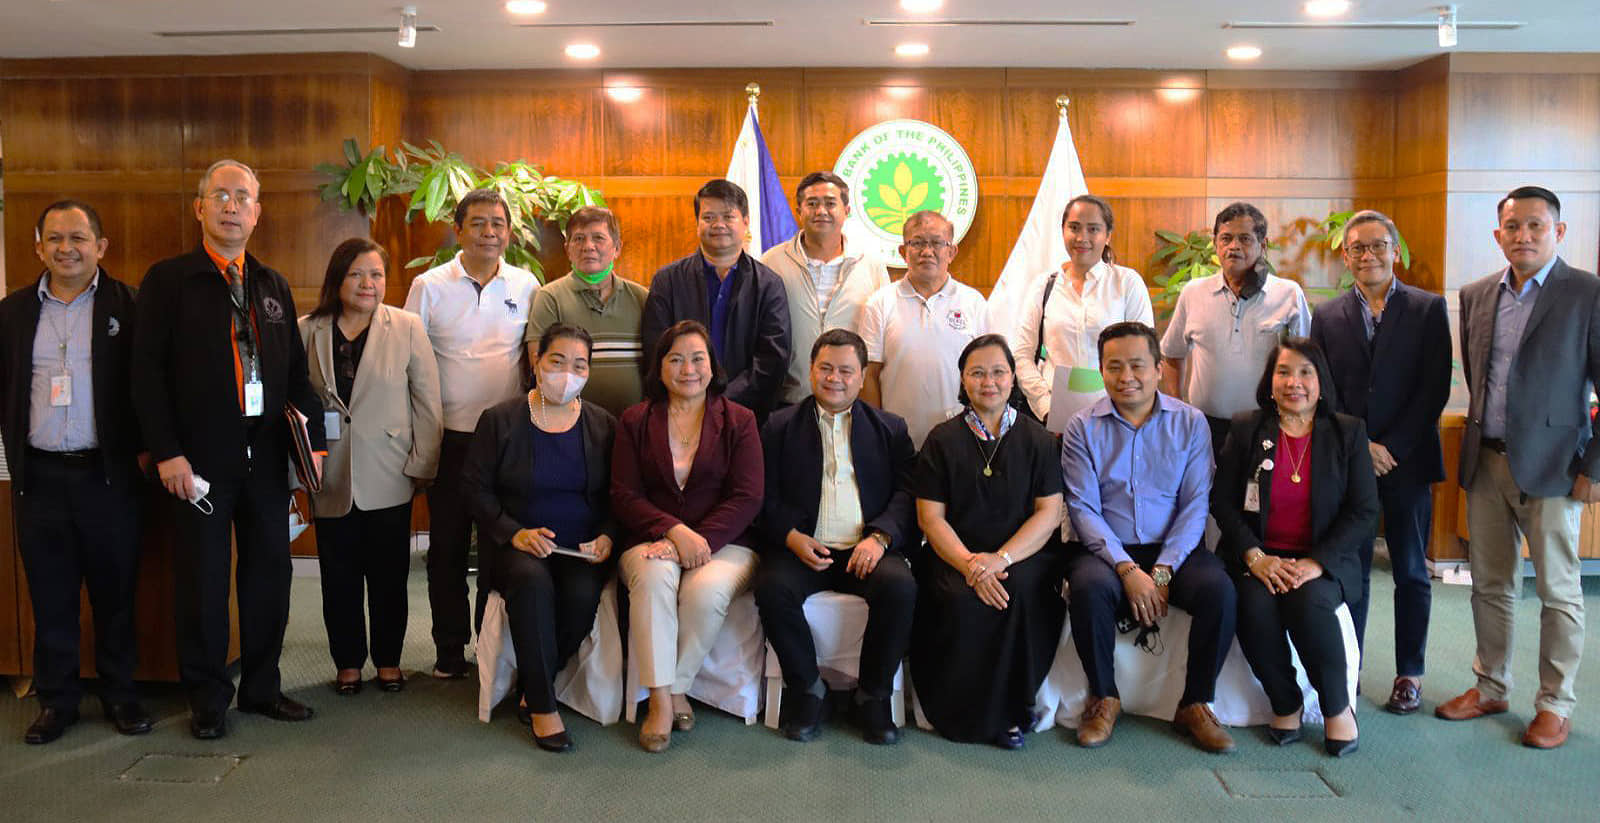 PR Supporting Photo - LANDBANK, COOP NATCCO Partylist meet to advance co-op cause